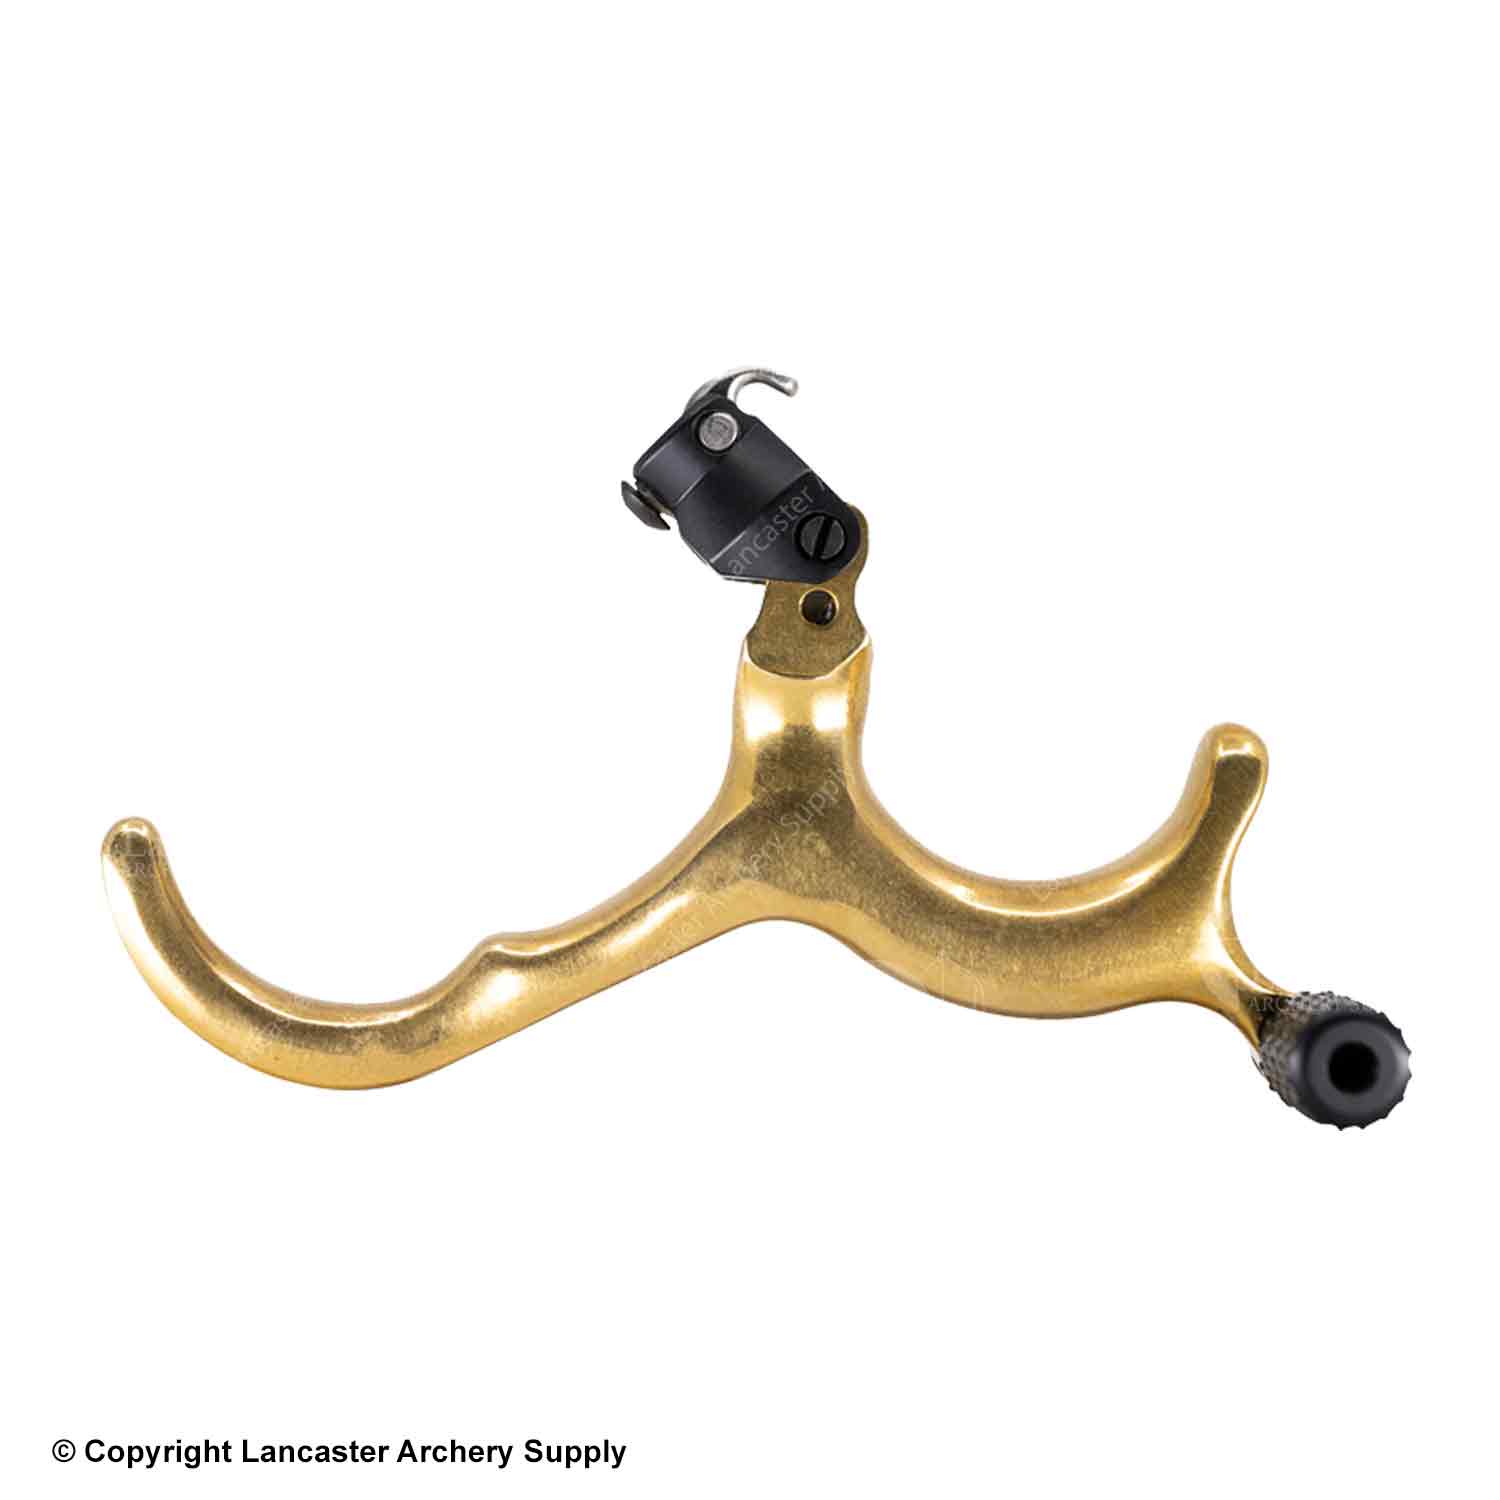 B3 Coop Pro Brass Back Tension Release